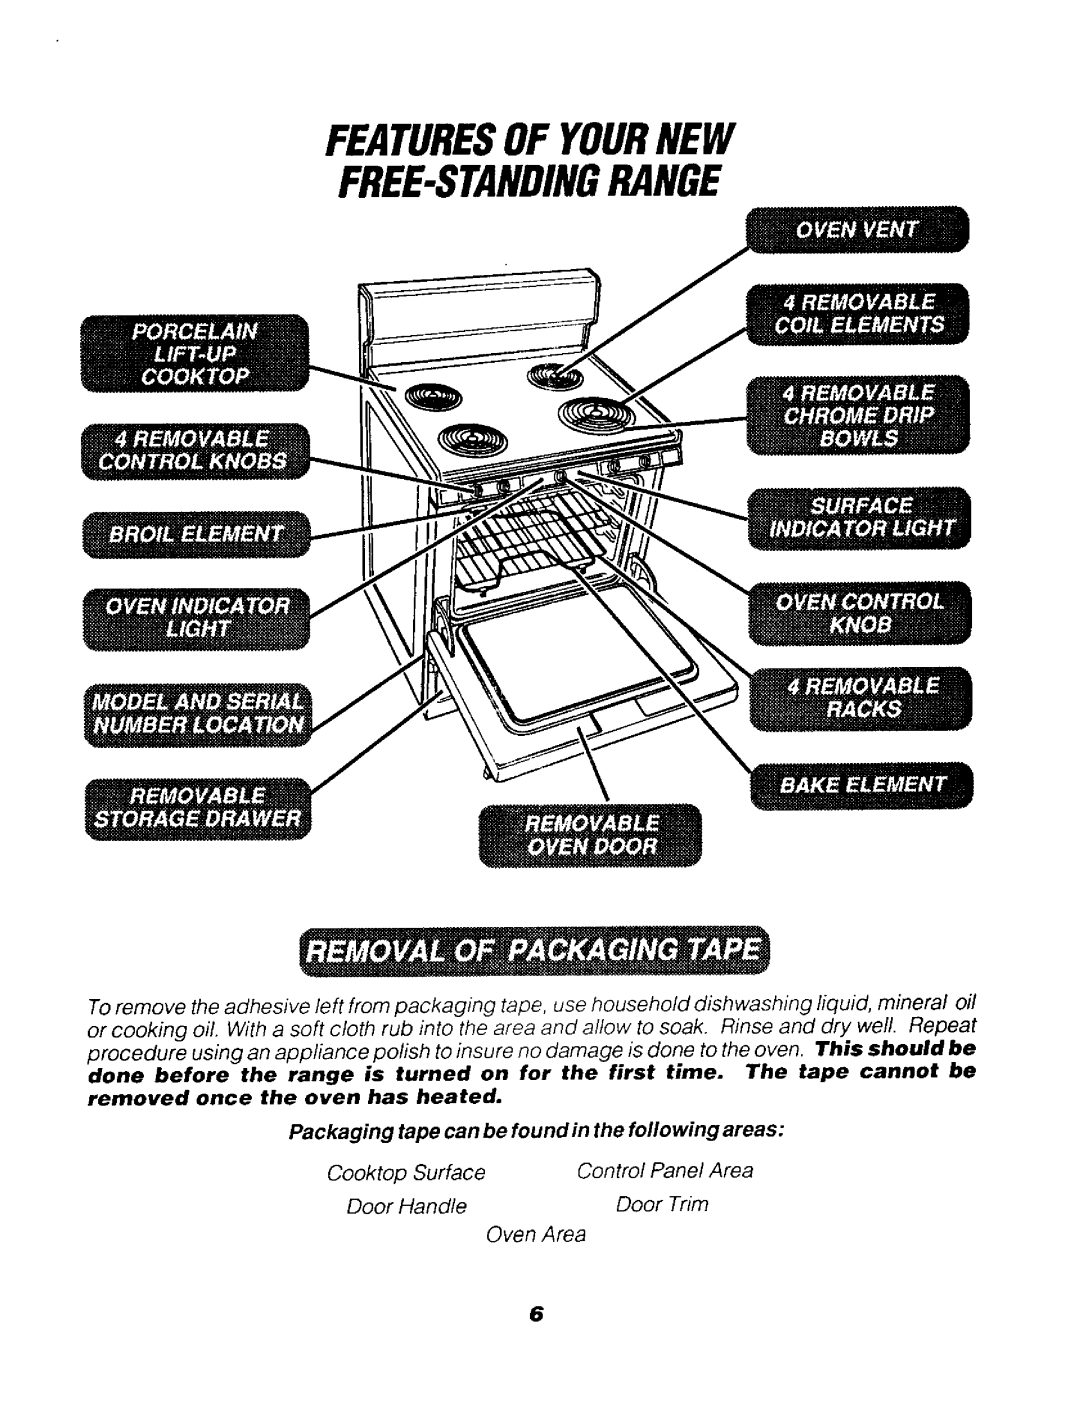 Sears 911. 62048, 911. 62078 Featuresof Yournew Free-Standingrange, removed once the oven has heated, Packaging, areas 